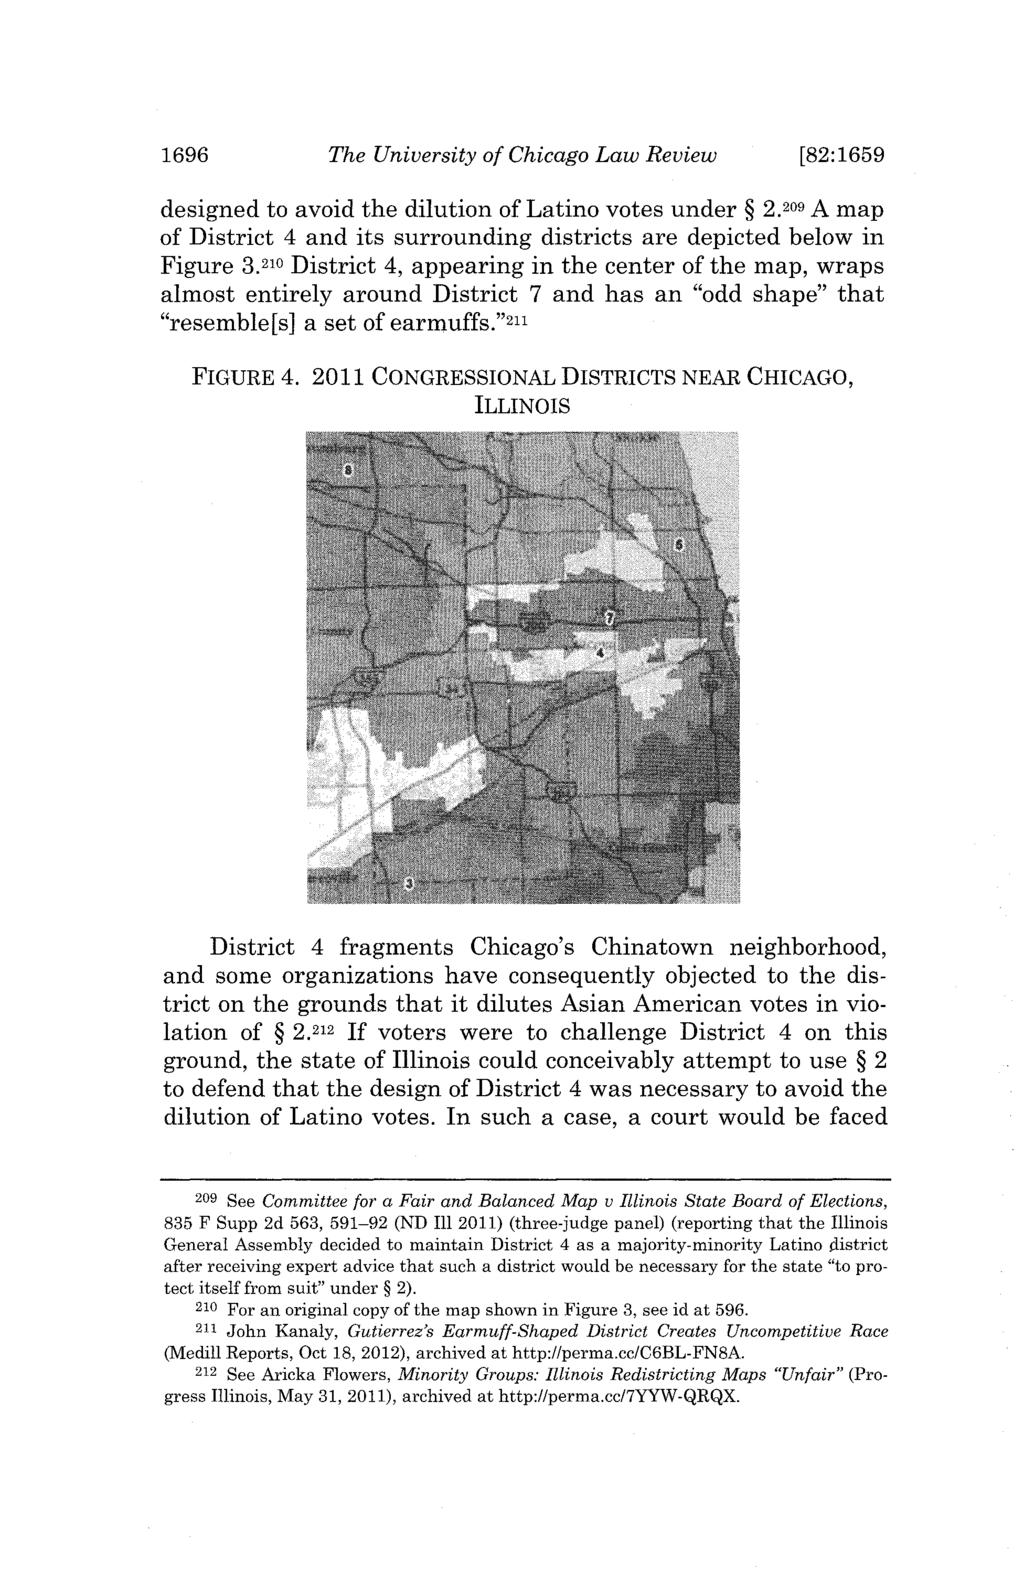 1696 The University of Chicago Law Review [82:1659 designed to avoid the dilution of Latino votes under 2.209 A map of District 4 and its surrounding districts are depicted below in Figure 3.